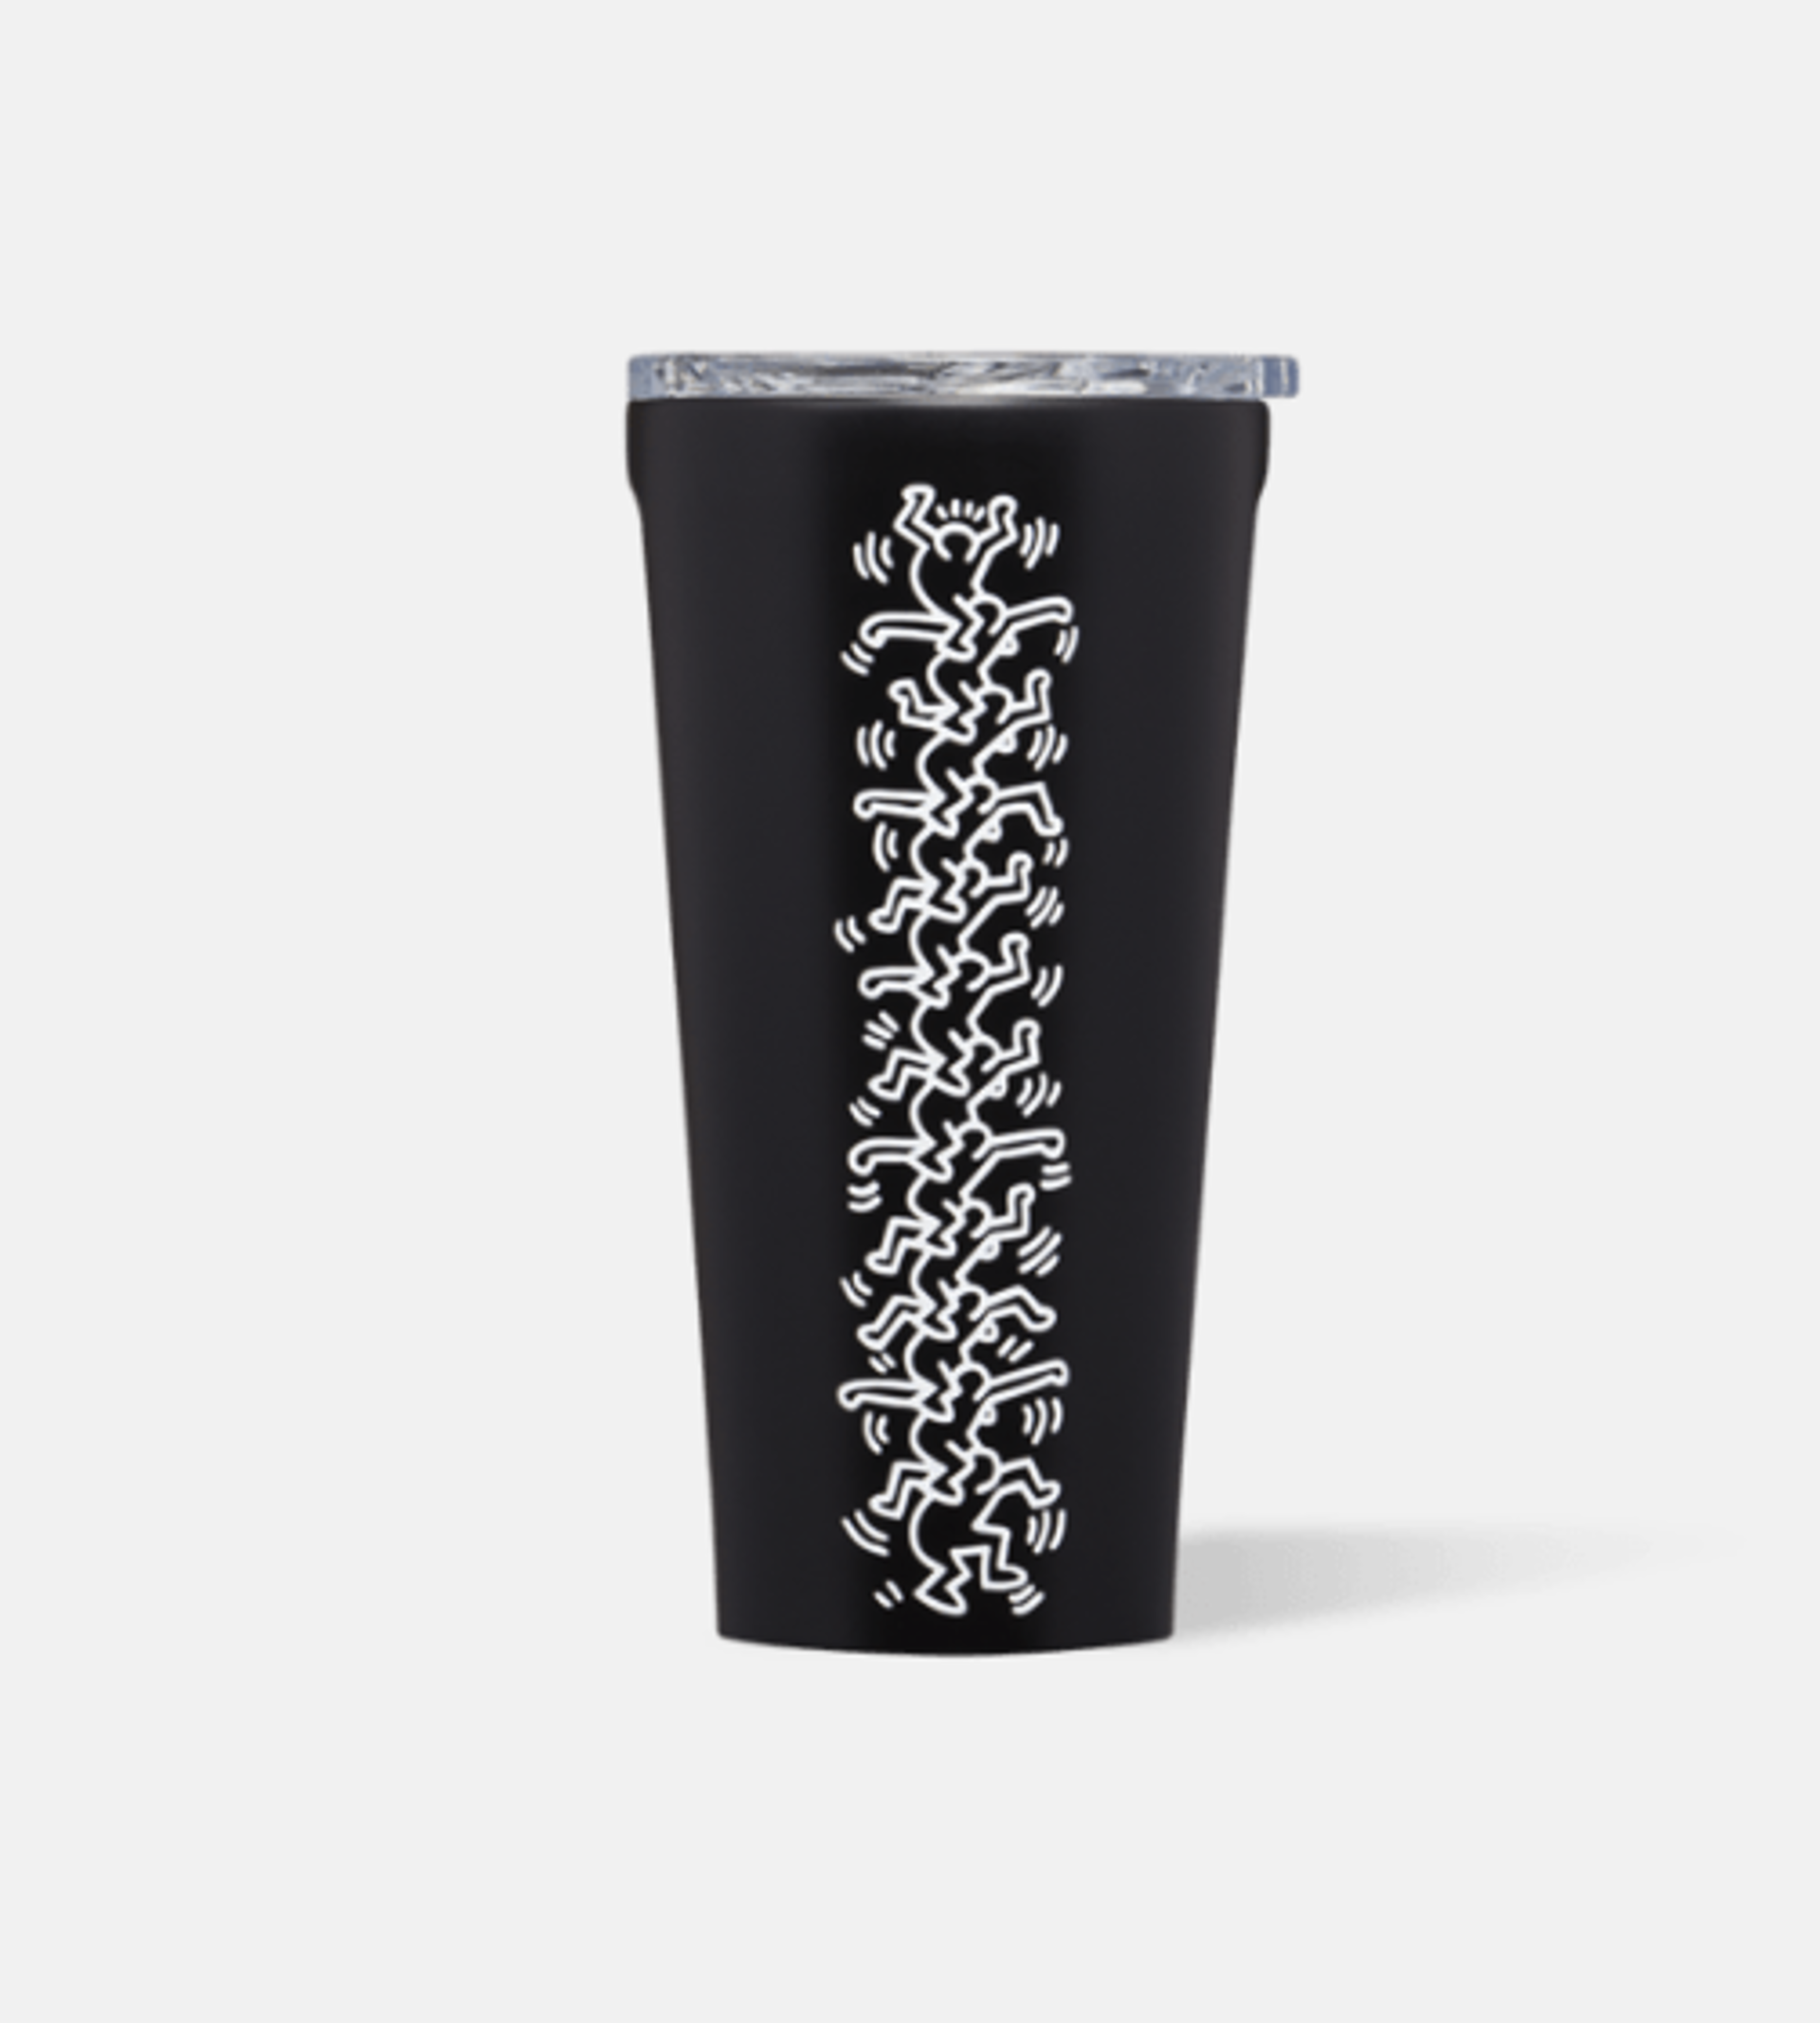 Keith Haring People Stack 16 oz Tumbler by Keith Haring